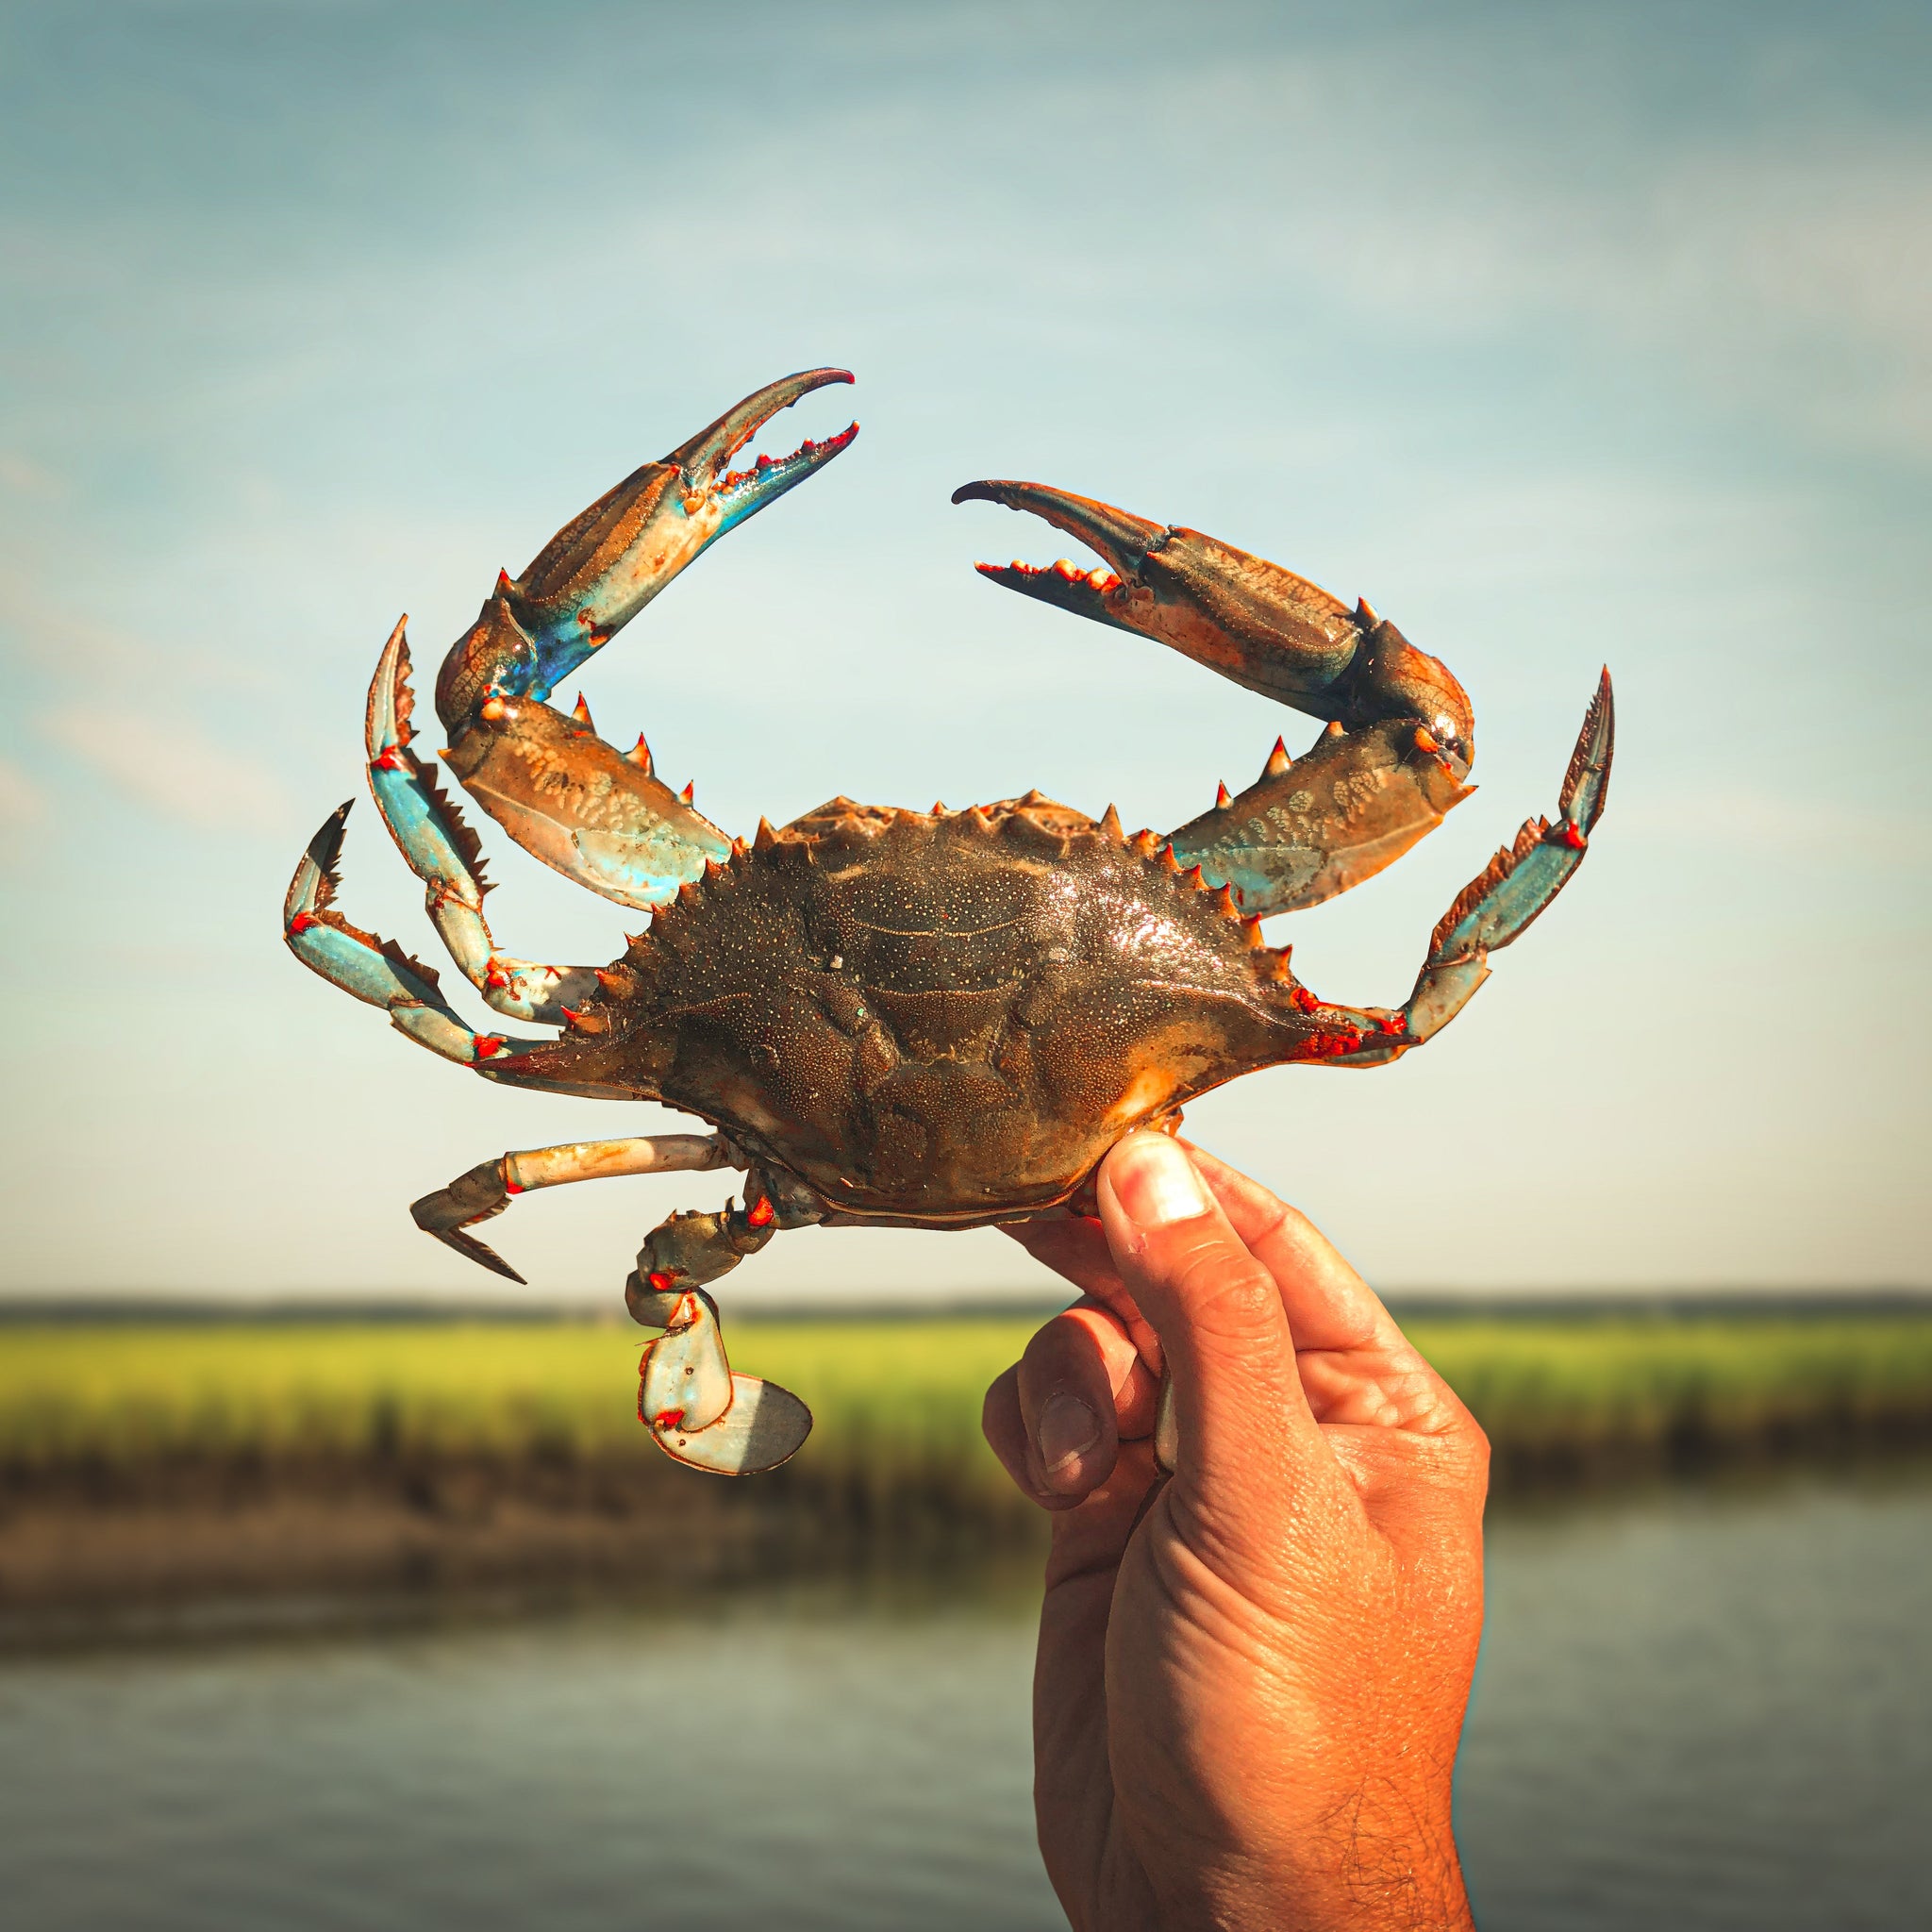 Should You Boil or Steam Blue Crabs?